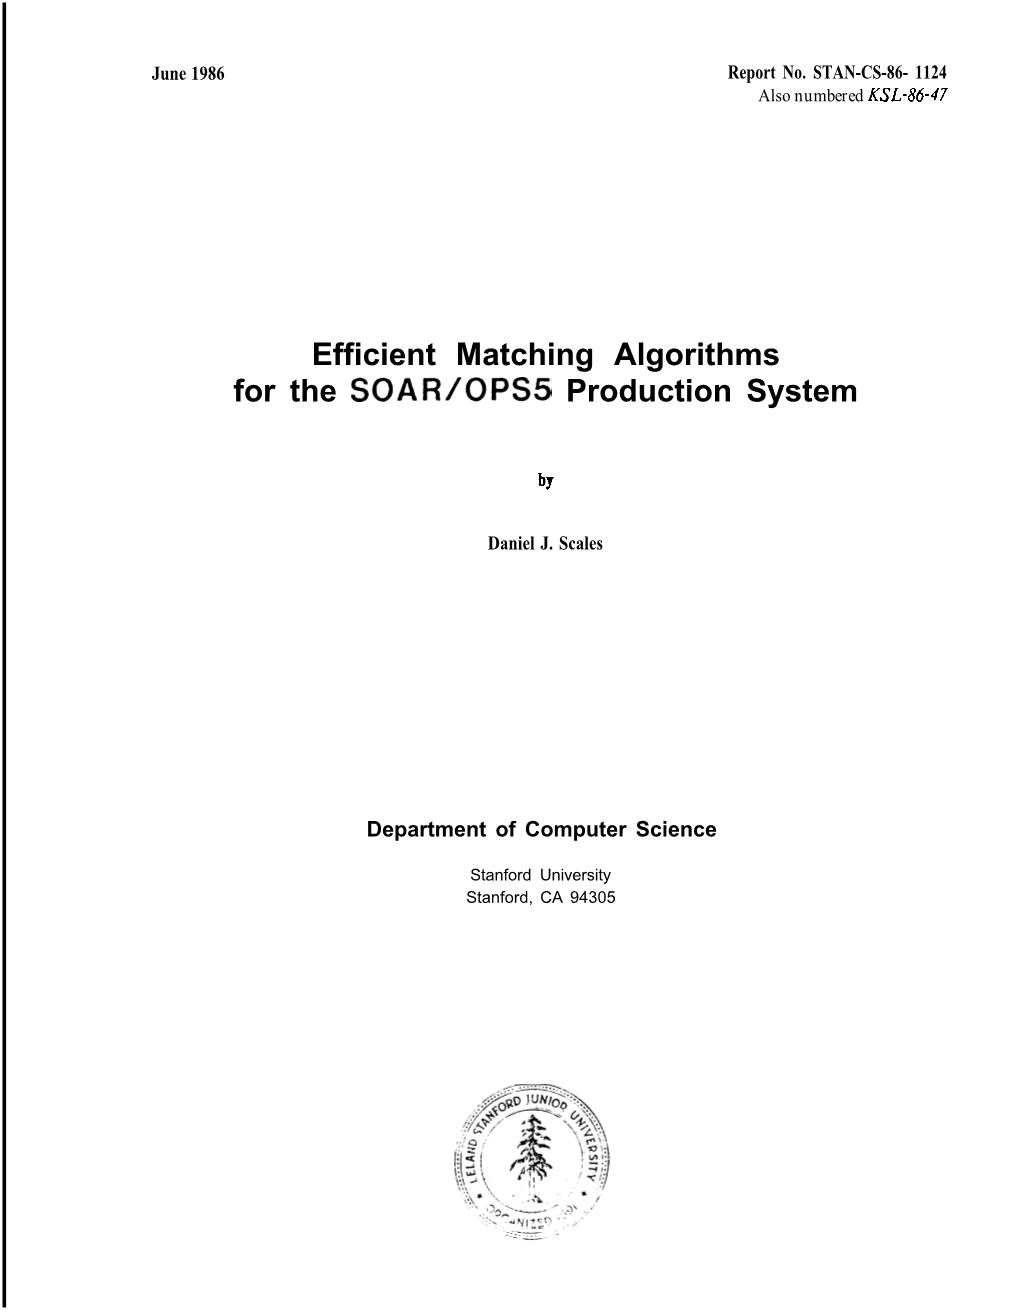 Efficient Matching Algorithms for the Soarlops Production System